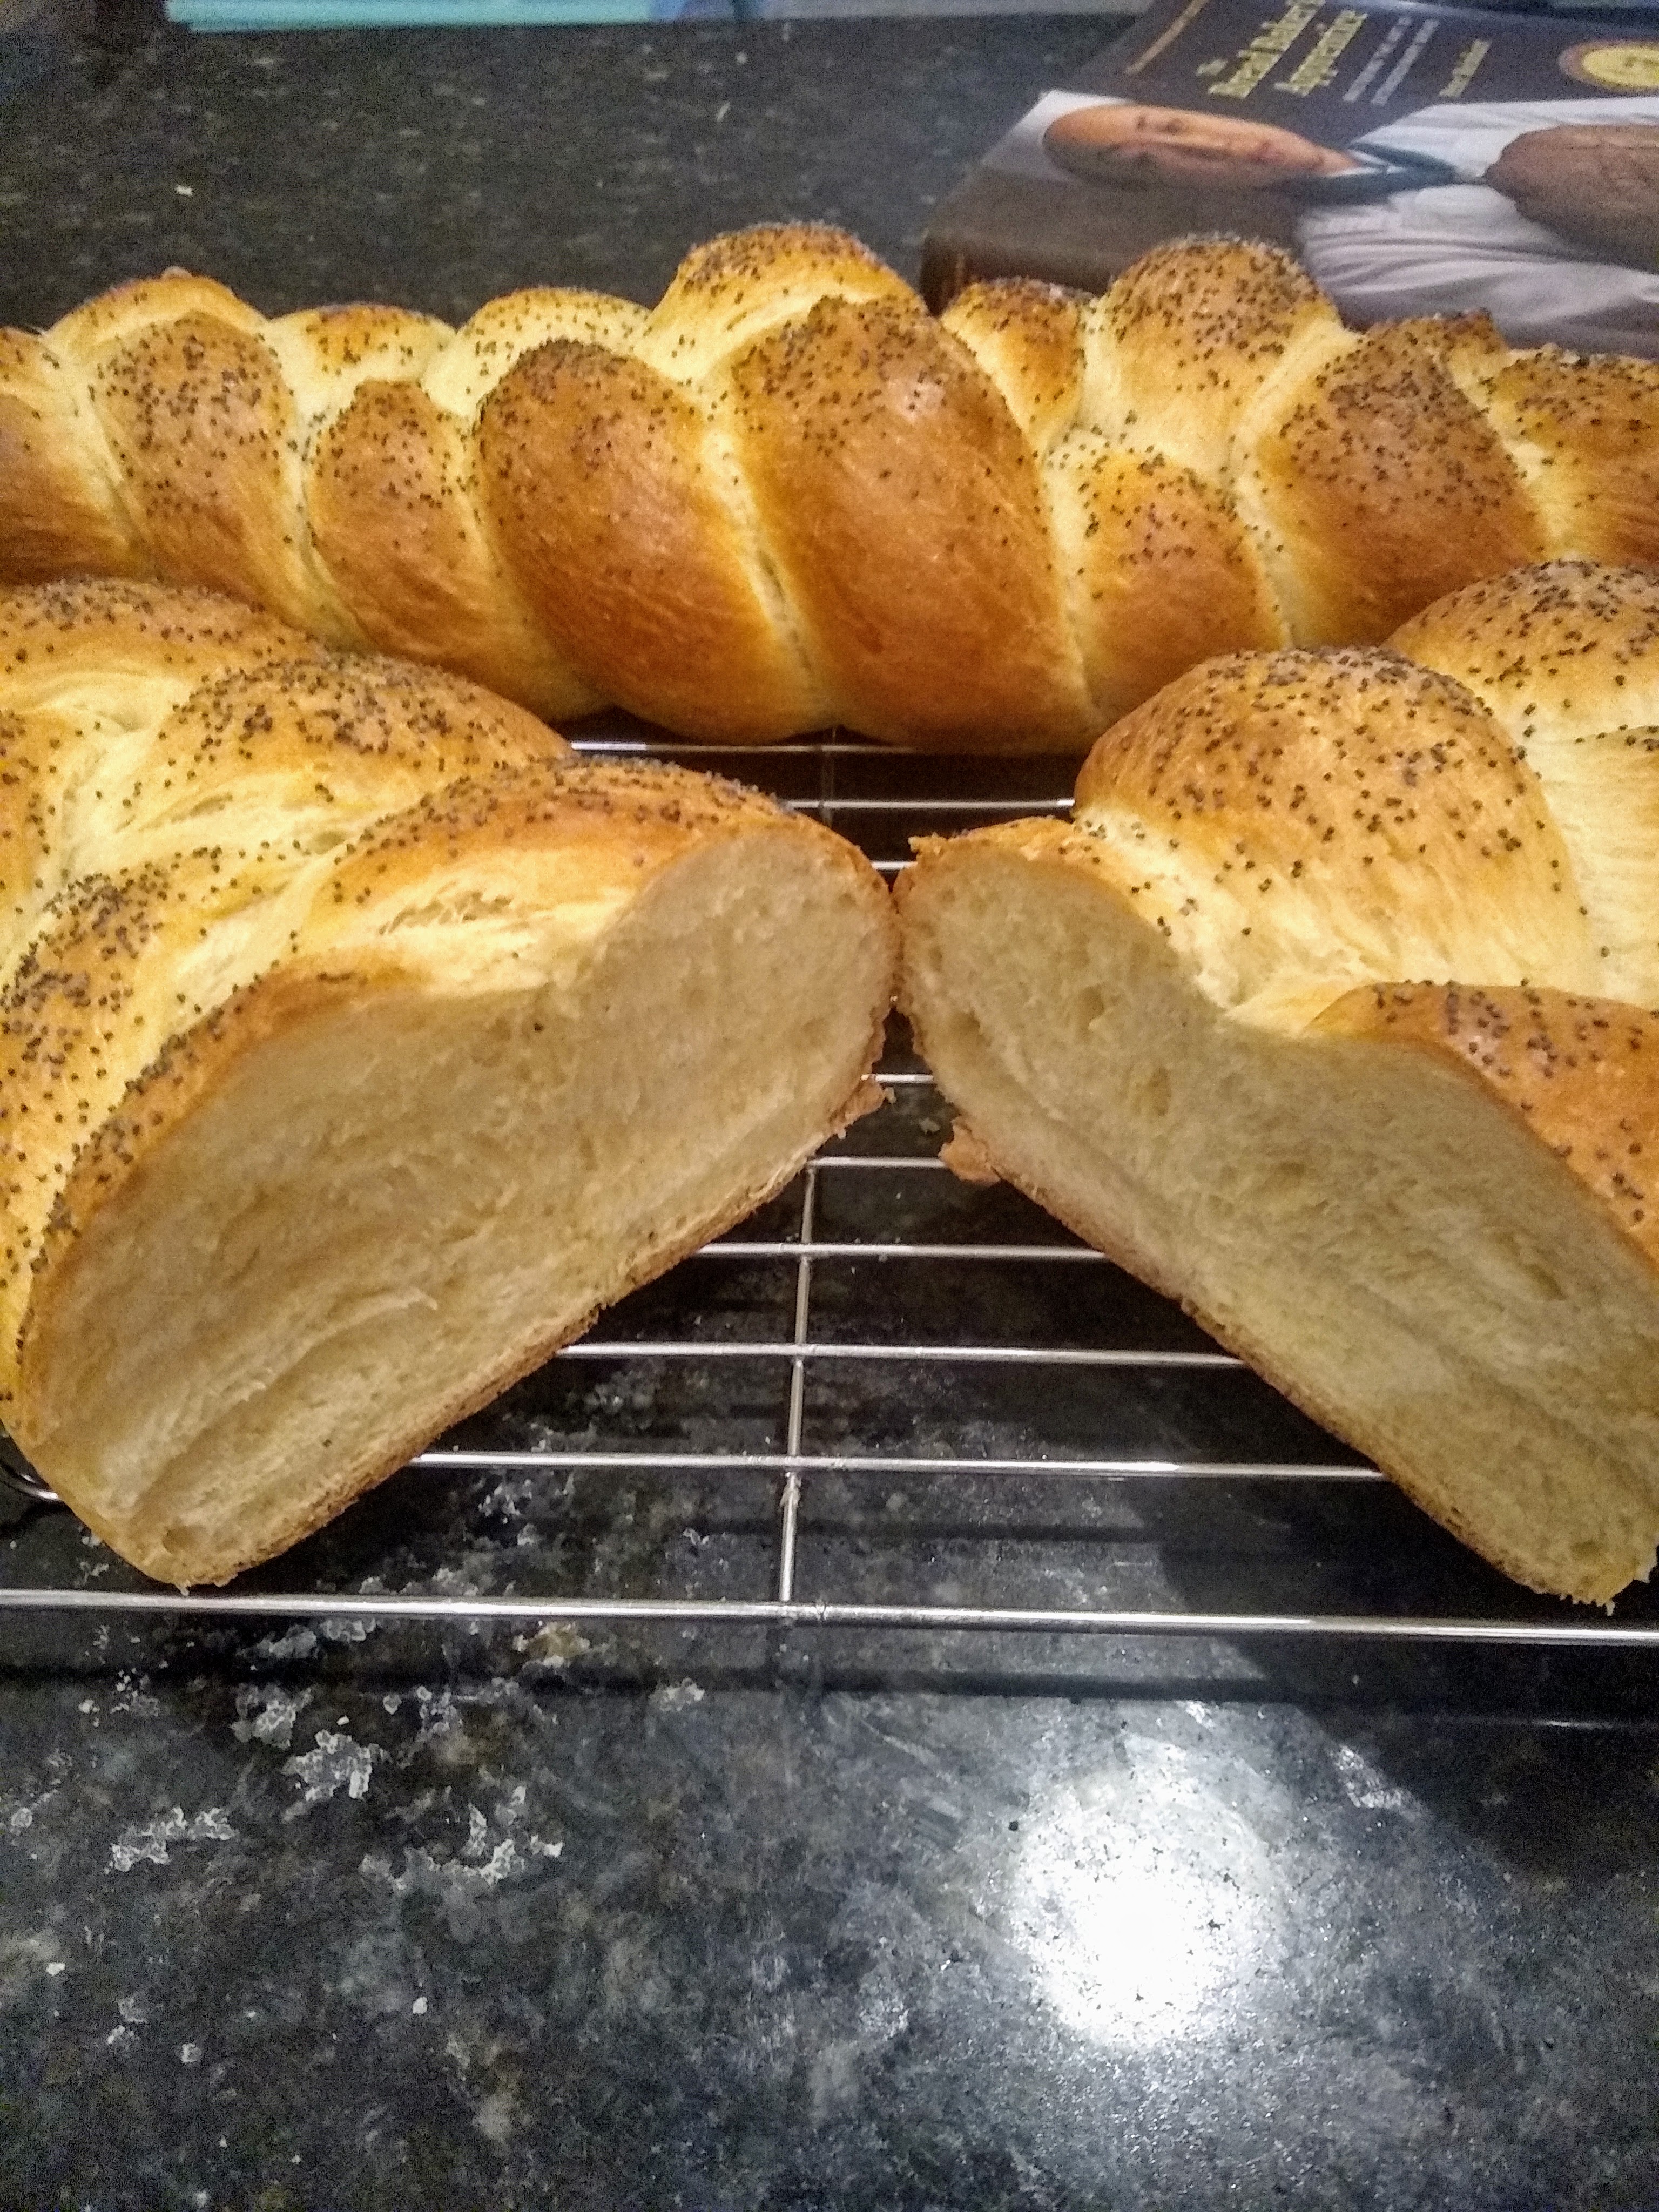 Completed challah